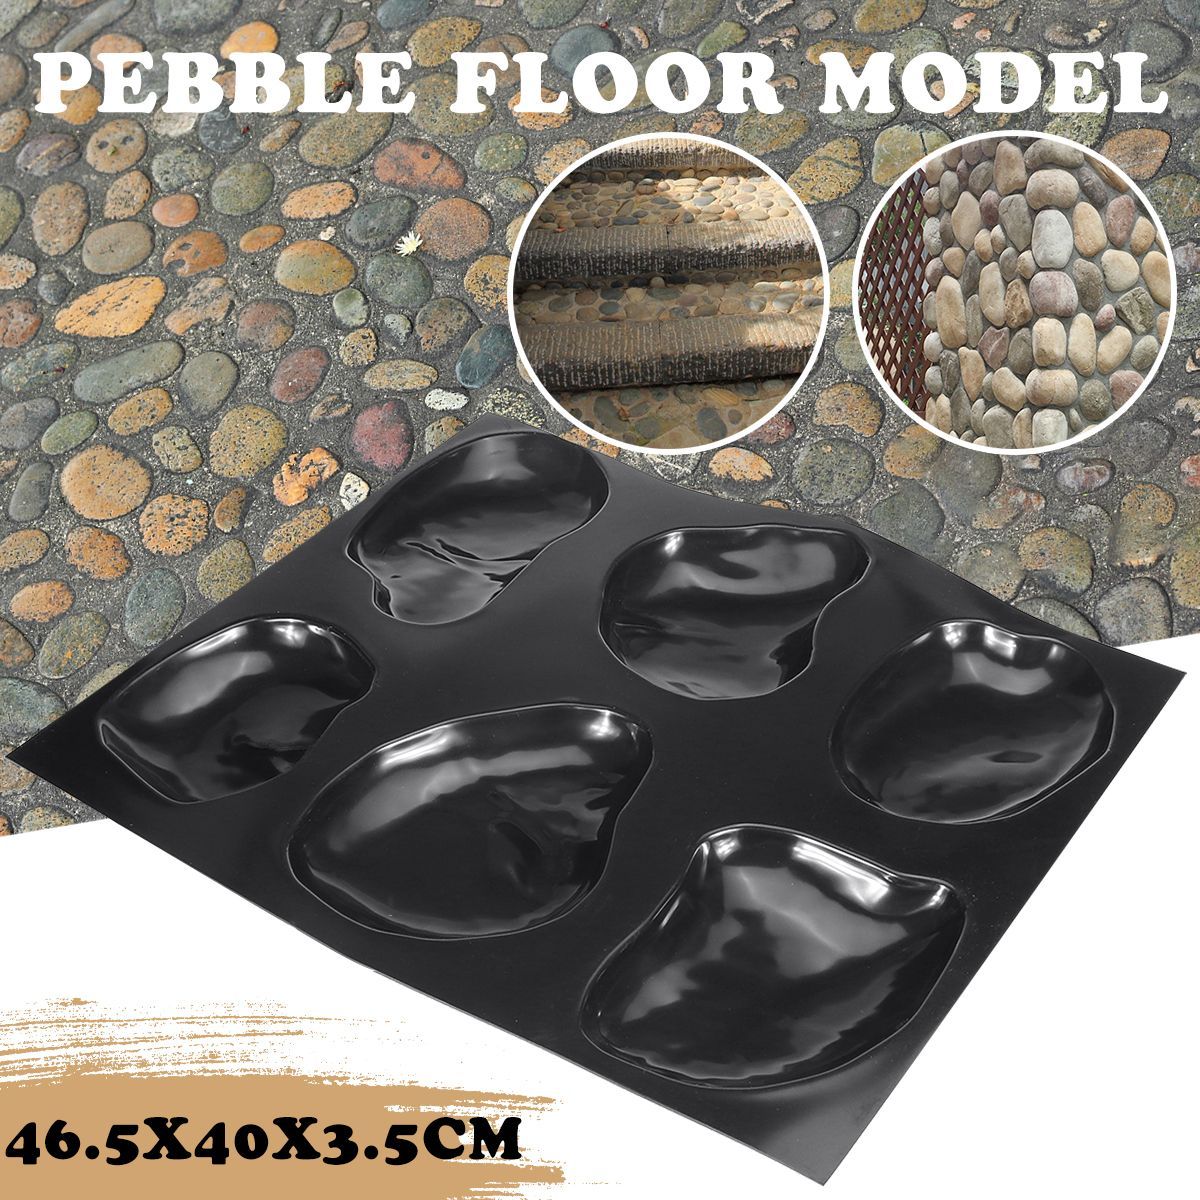 Path-Floor-Mould-Garden-Road-Tile-Stone-Mold-Concrete-Stepping-Tool-1614891